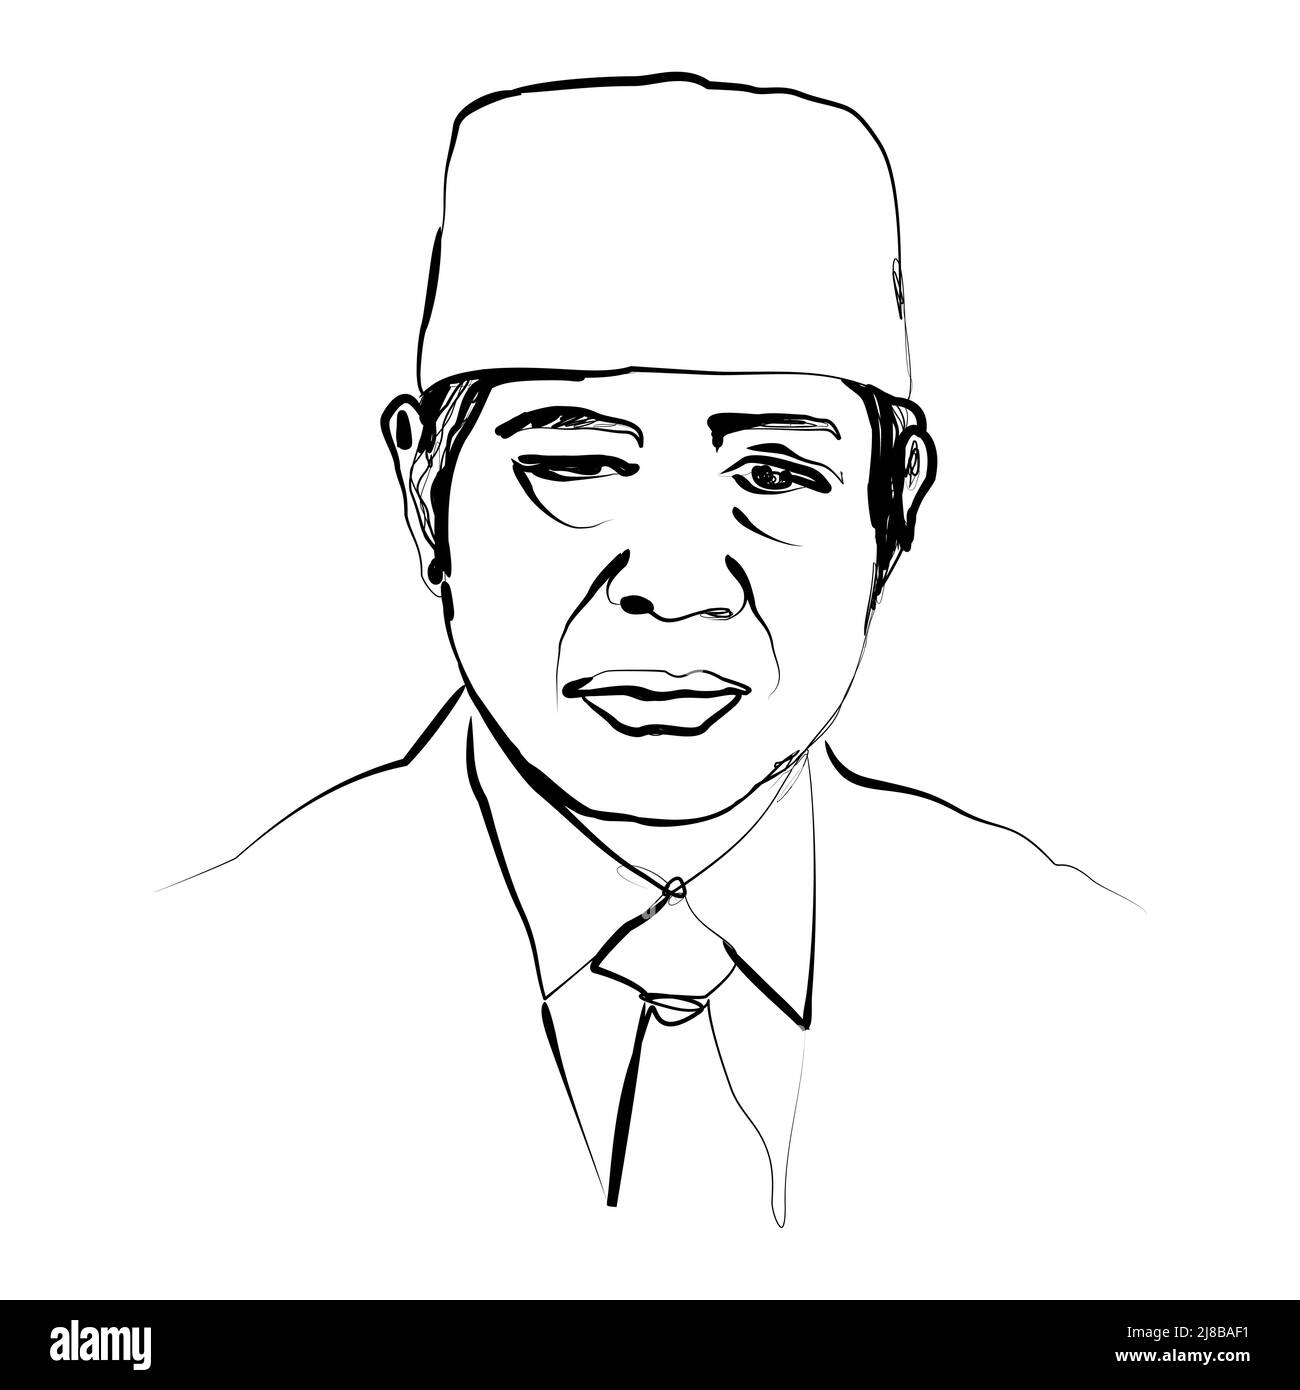 Black And White Sketch Of The Second President Of The Republic Of